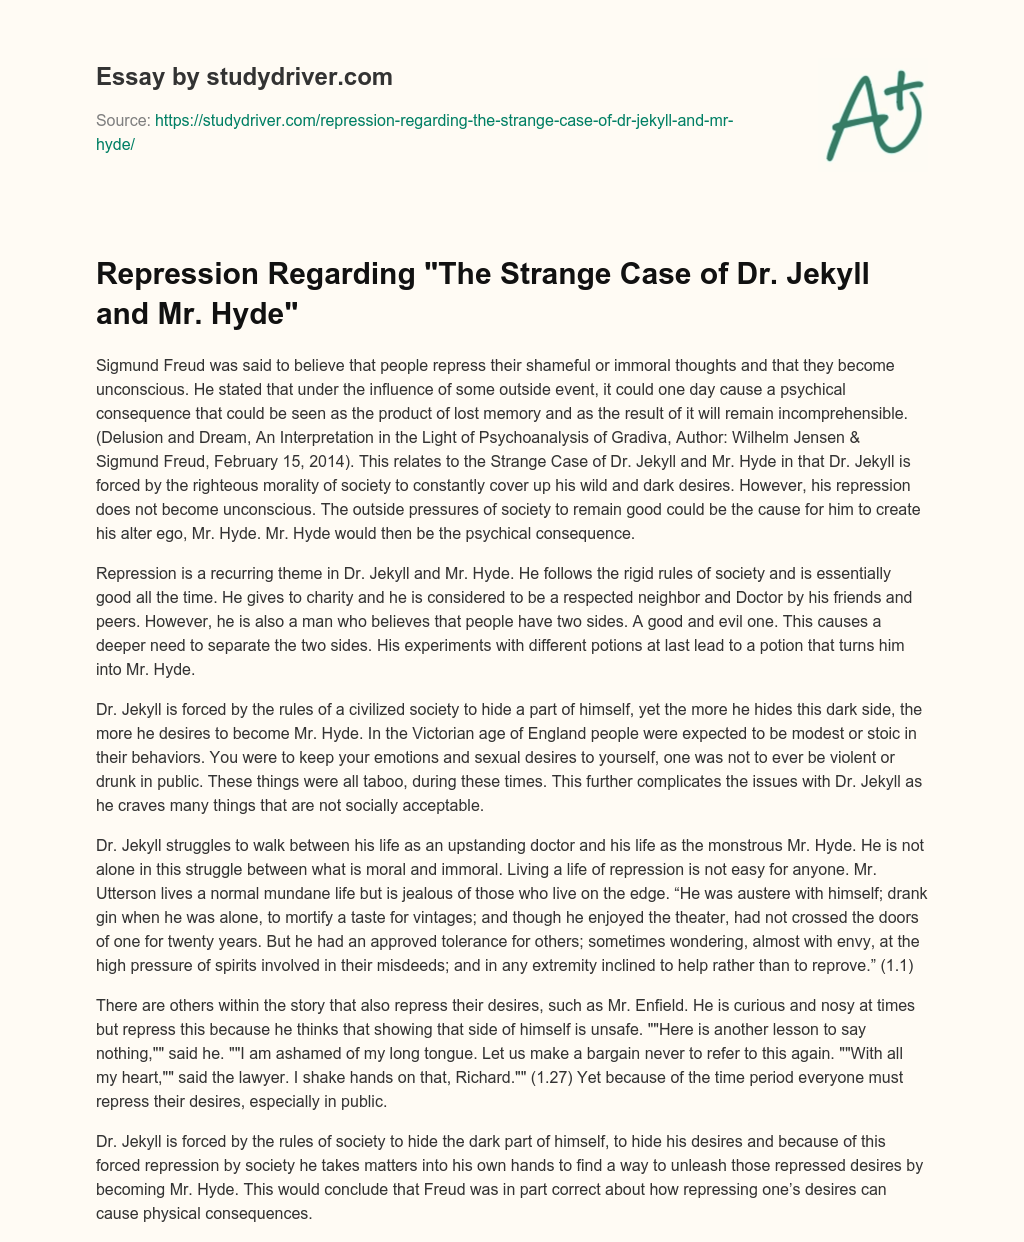 Repression Regarding “The Strange Case of Dr. Jekyll and Mr. Hyde” essay